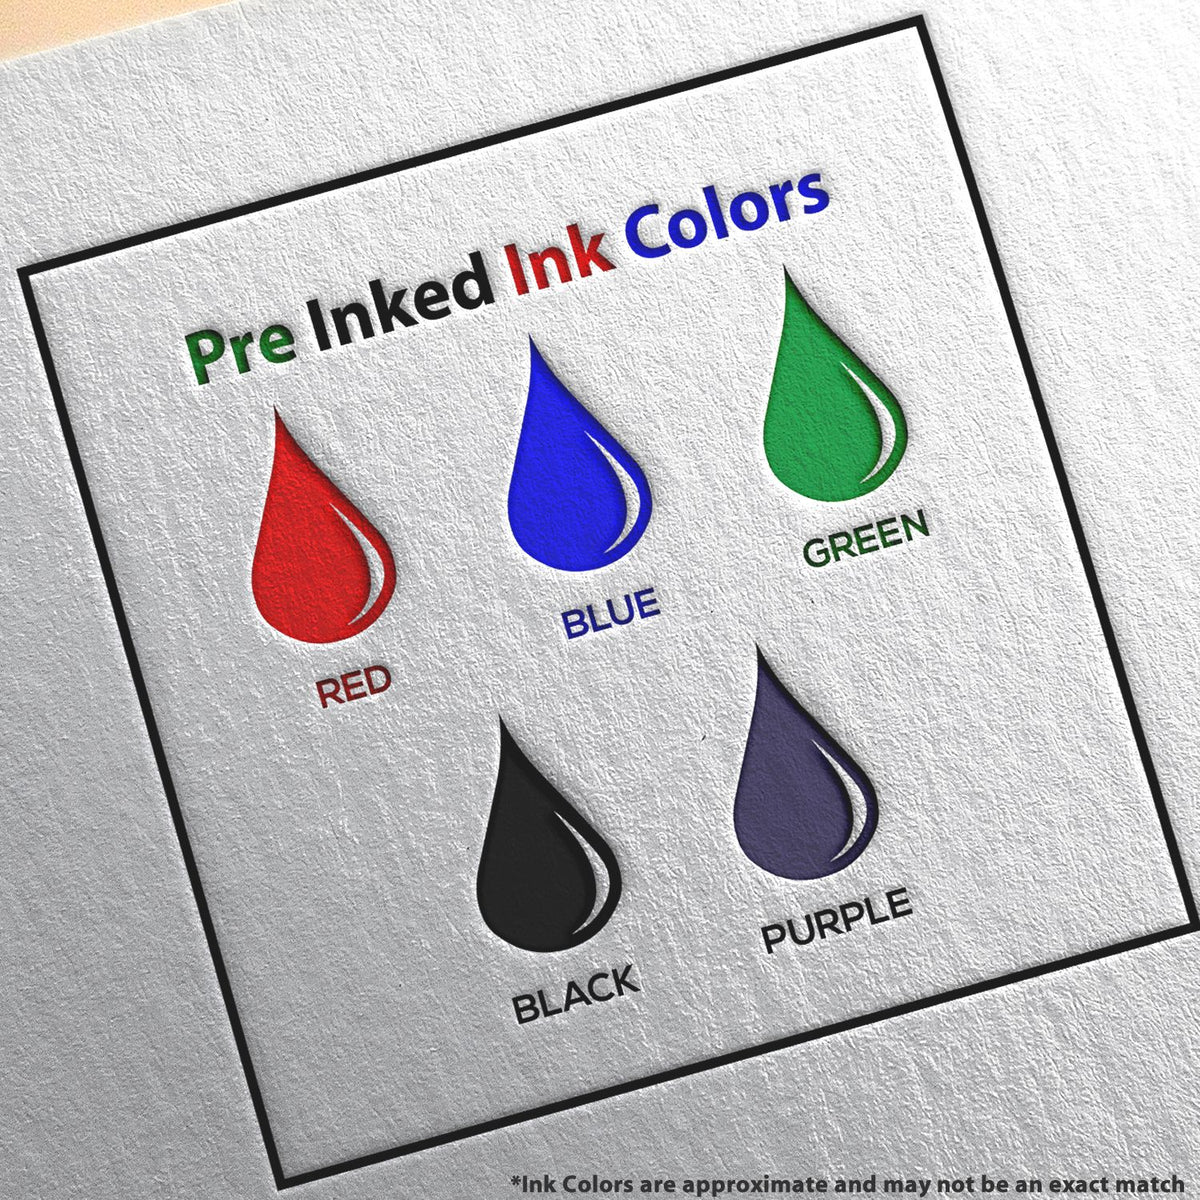 A picture showing the different ink colors or hues available for the Slim Pre-Inked Texas Architect Seal Stamp product.